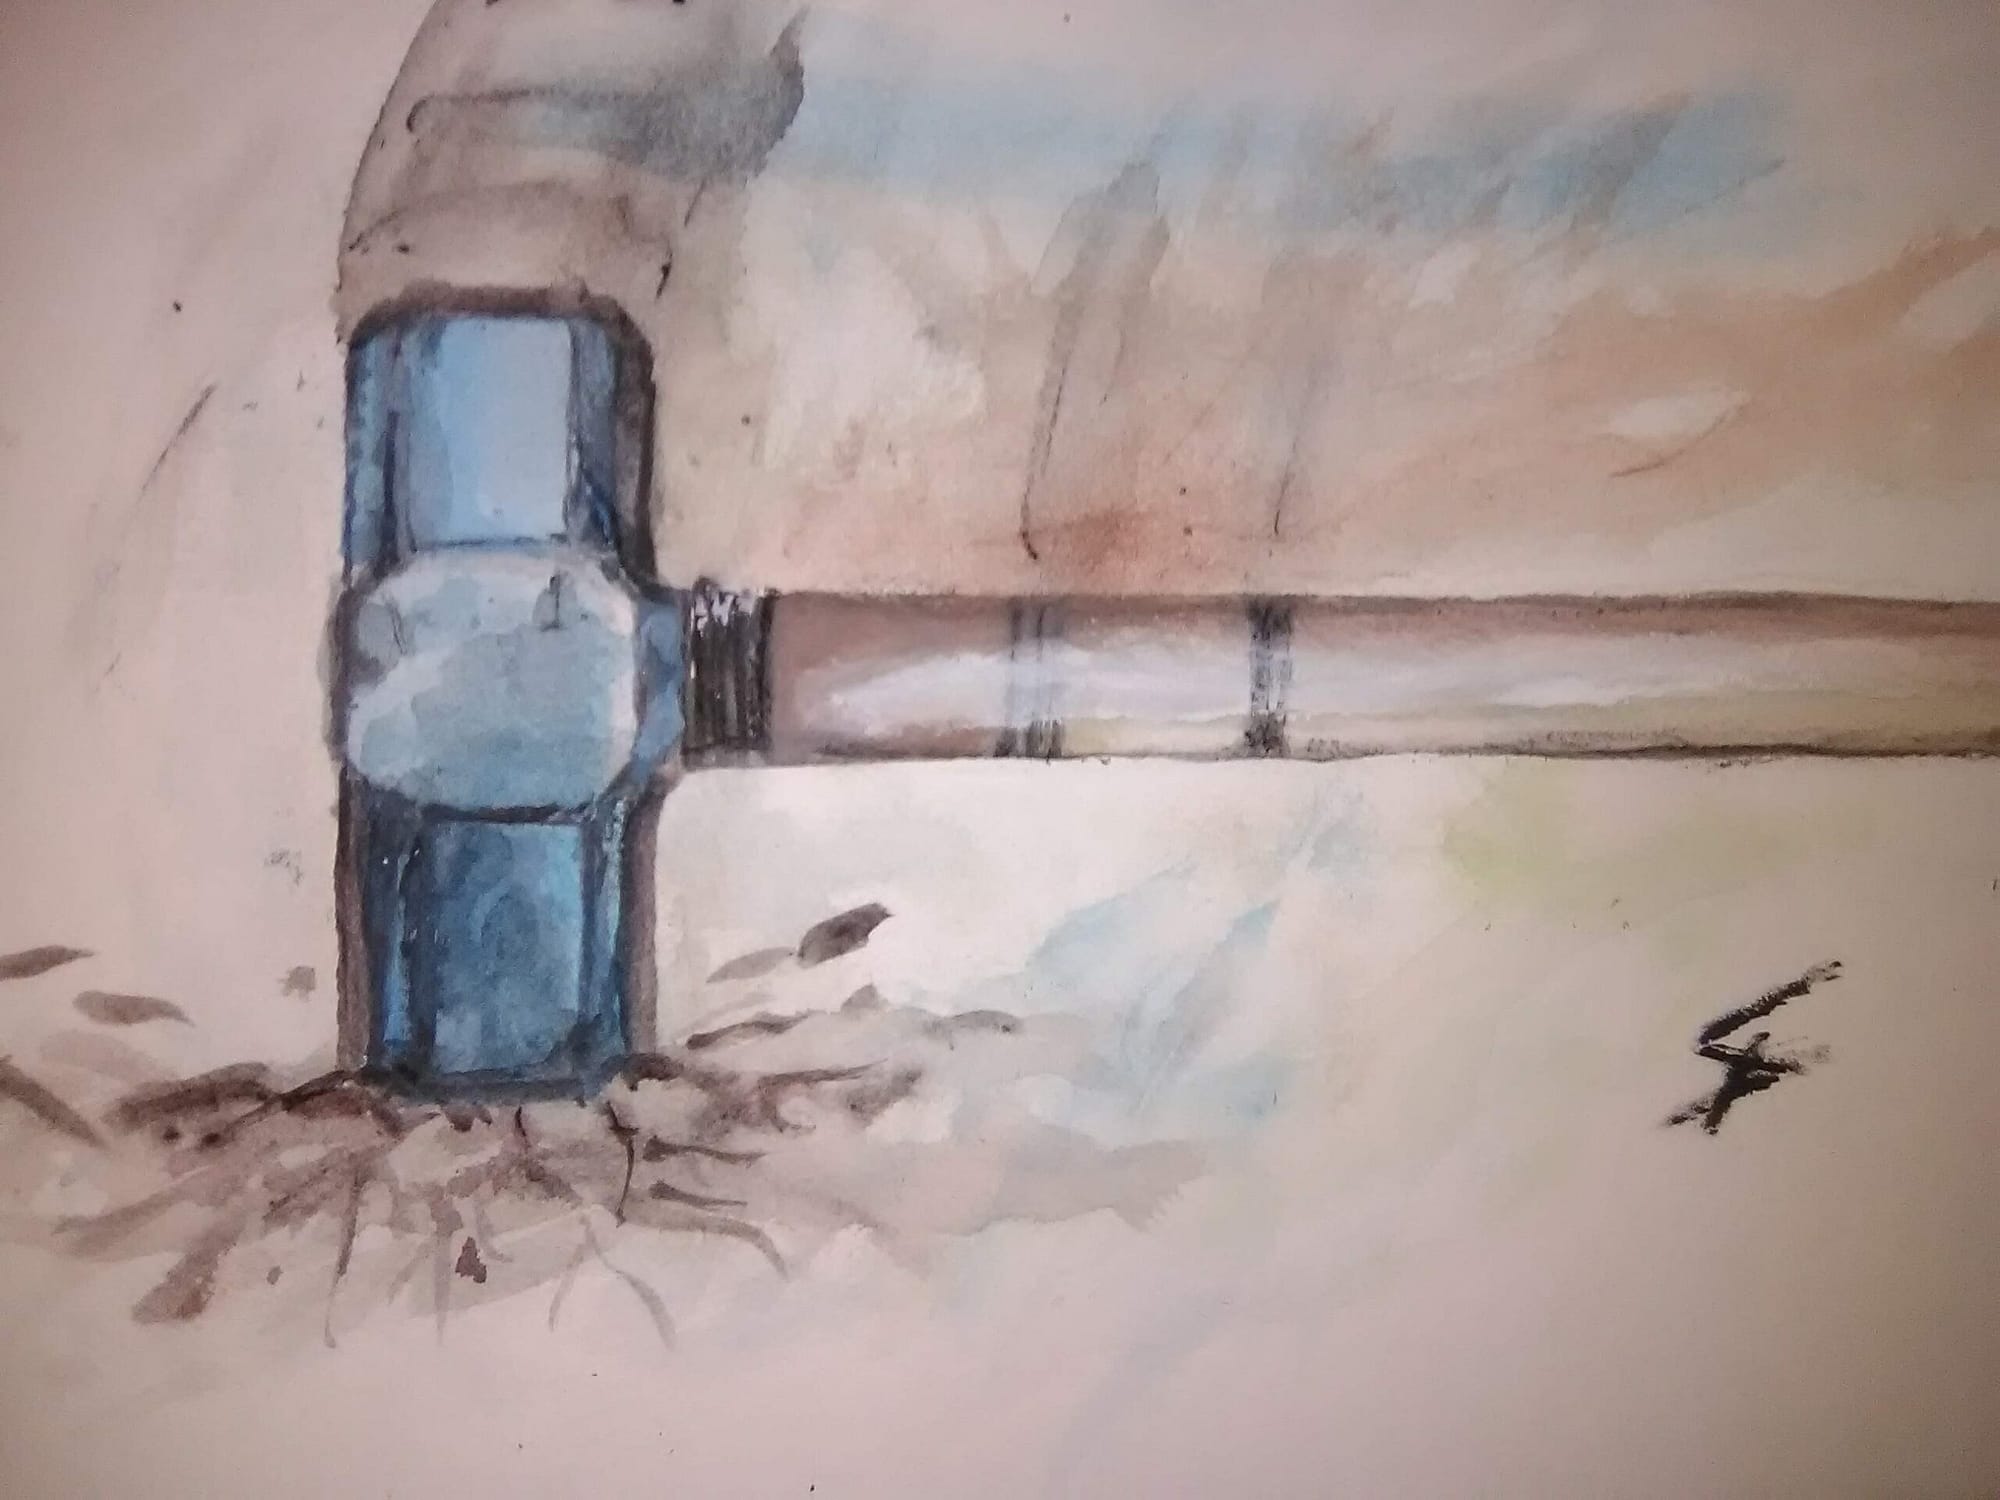 watercolor exercise #12 - sledge